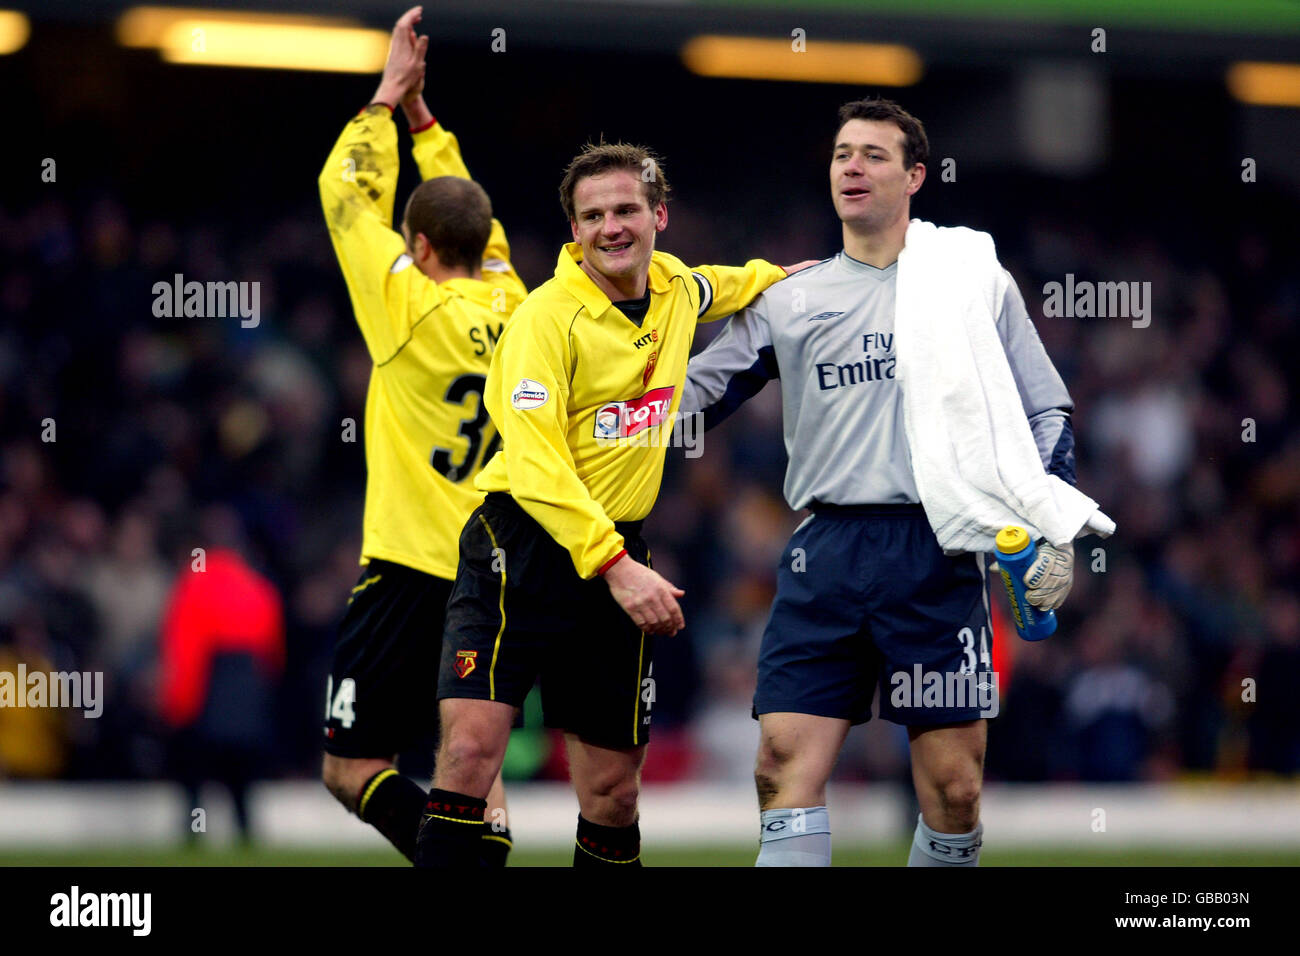 Soccer - AXA FA Cup - Third Round - Watford v Chelsea. Watford's Captain Neal Ardley shakes hands with Chelsea's goalkeeper Neil Sullivan at the end of the game Stock Photo